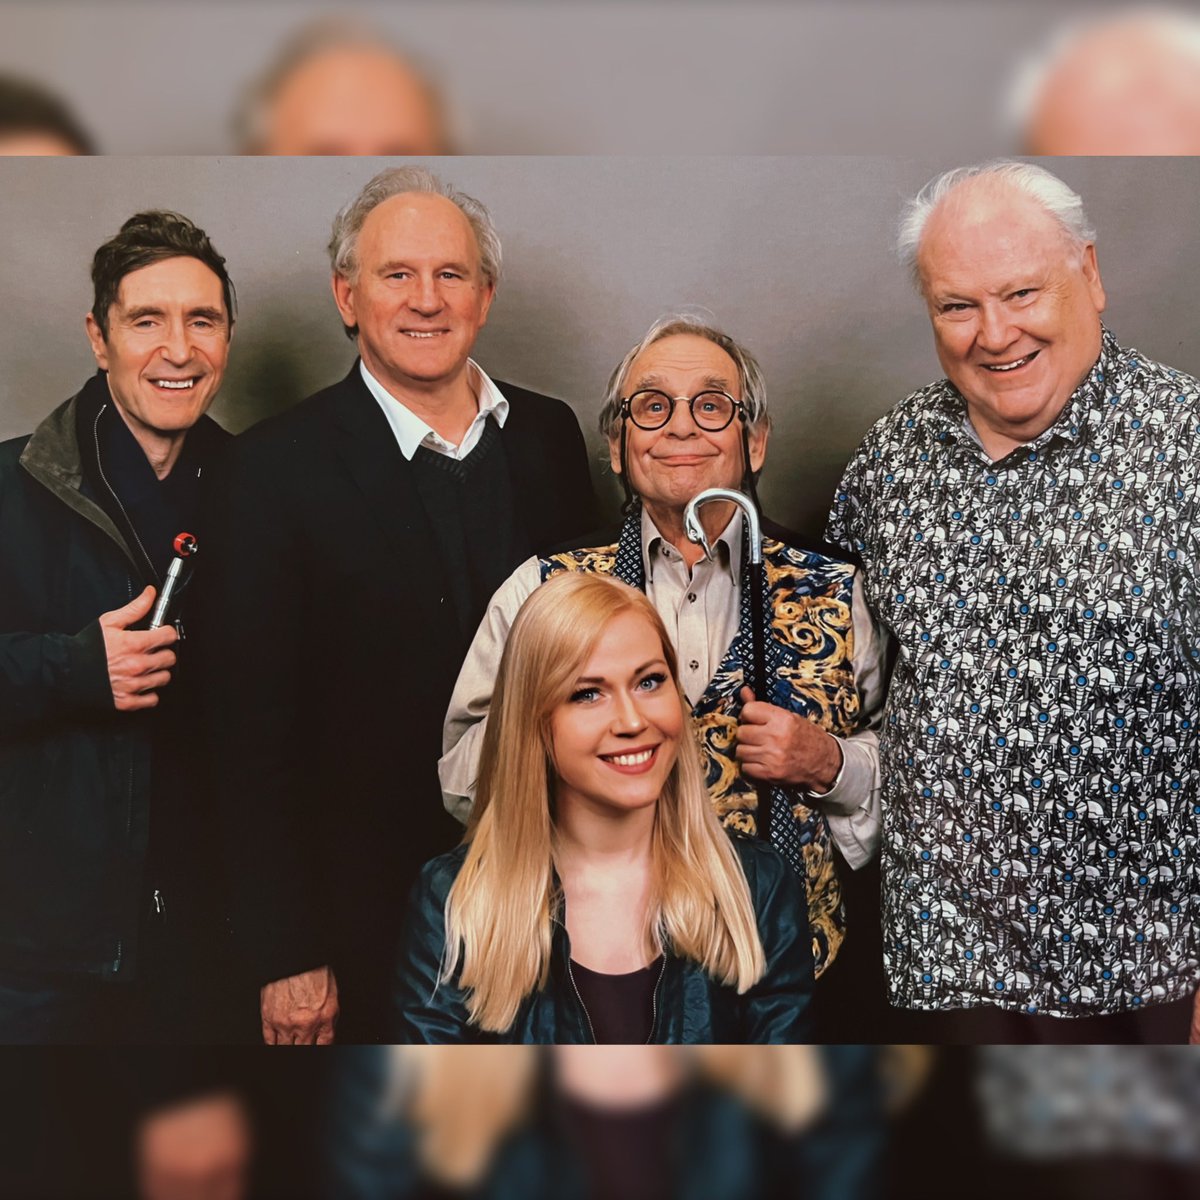 “The Five Doctors 2”

12 year old me and 30 year old me are equally thrilled to have met the  absolute legends that are Peter Davison, Colin Baker, Sylvester McCoy and Paul McGann 🥹💙💙

@comconaberdeen #comicconaberdeen #comicconscotland #comicconnortheast #doctorwho